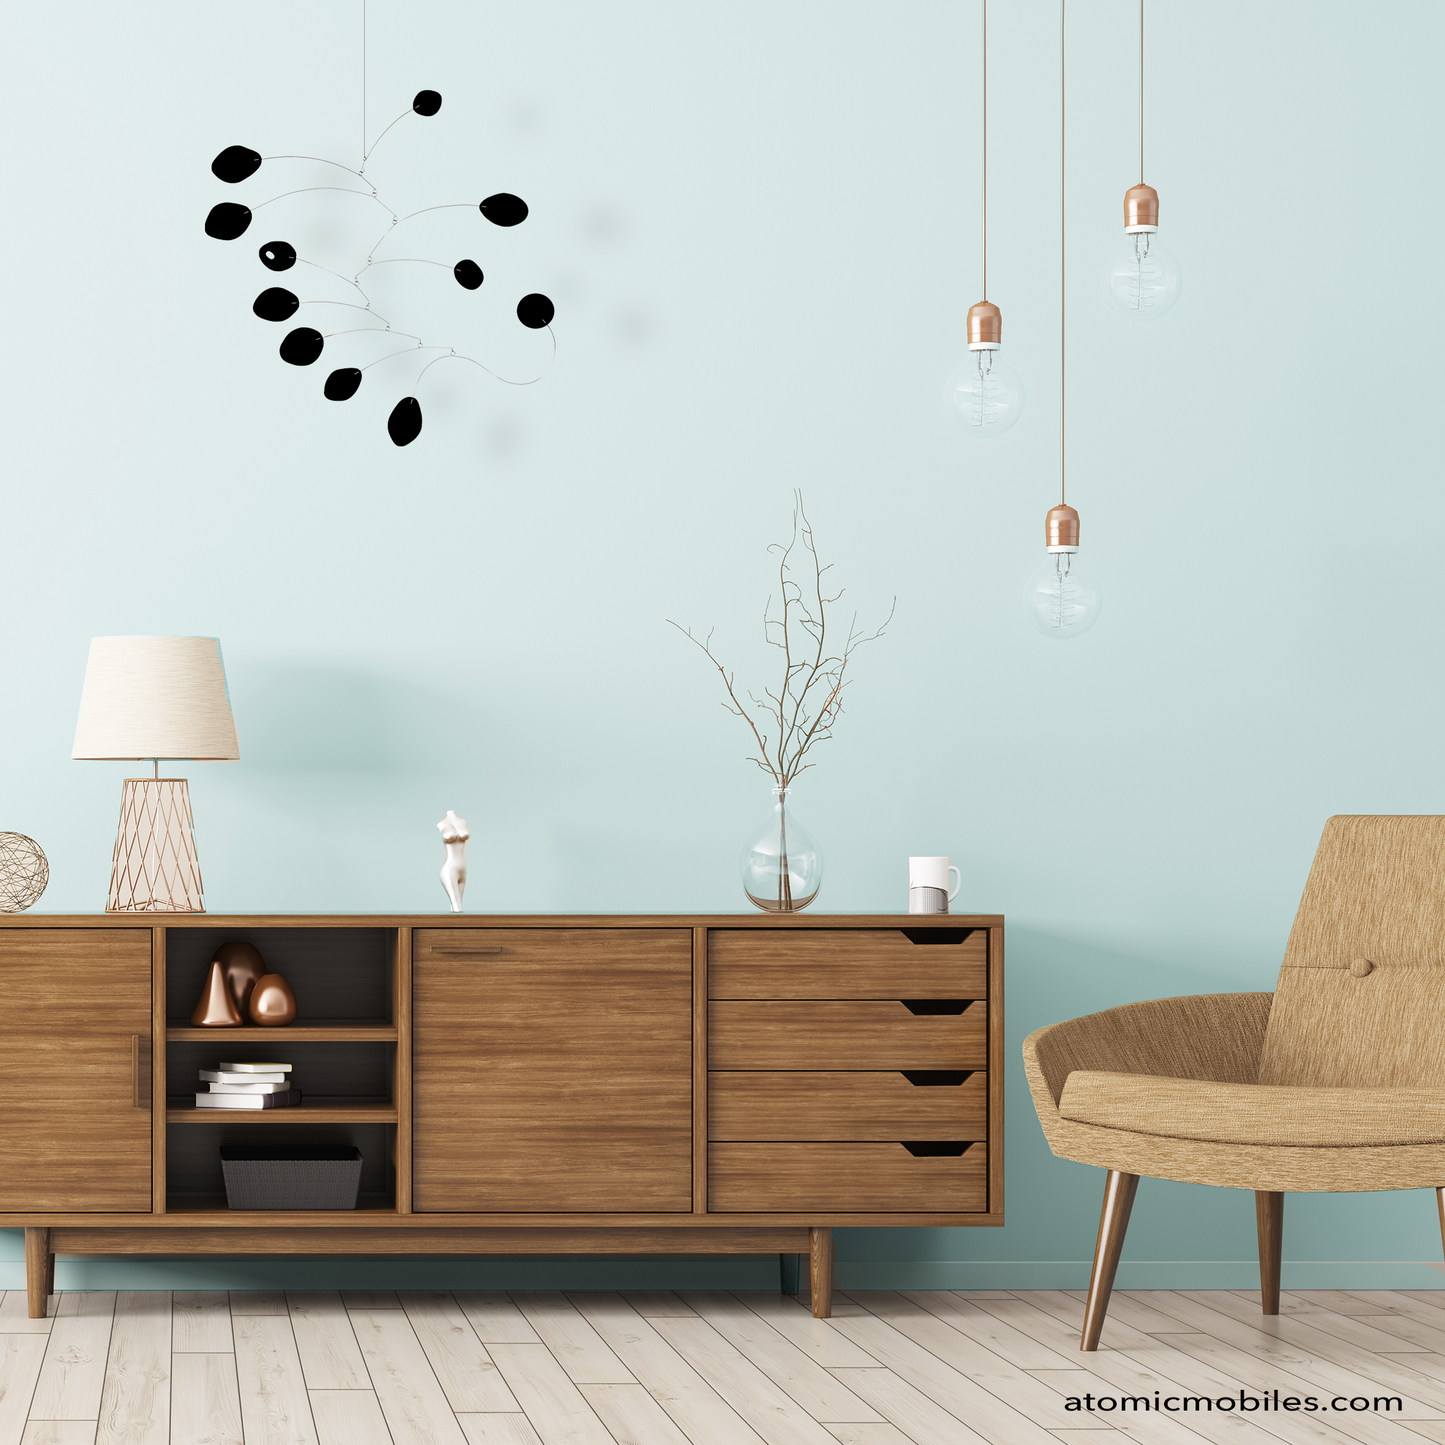 Beautiful mid century modern room with wood credenza sideboard, mcm chair, and all black MCM hanging art mobile by AtomicMobiles.com